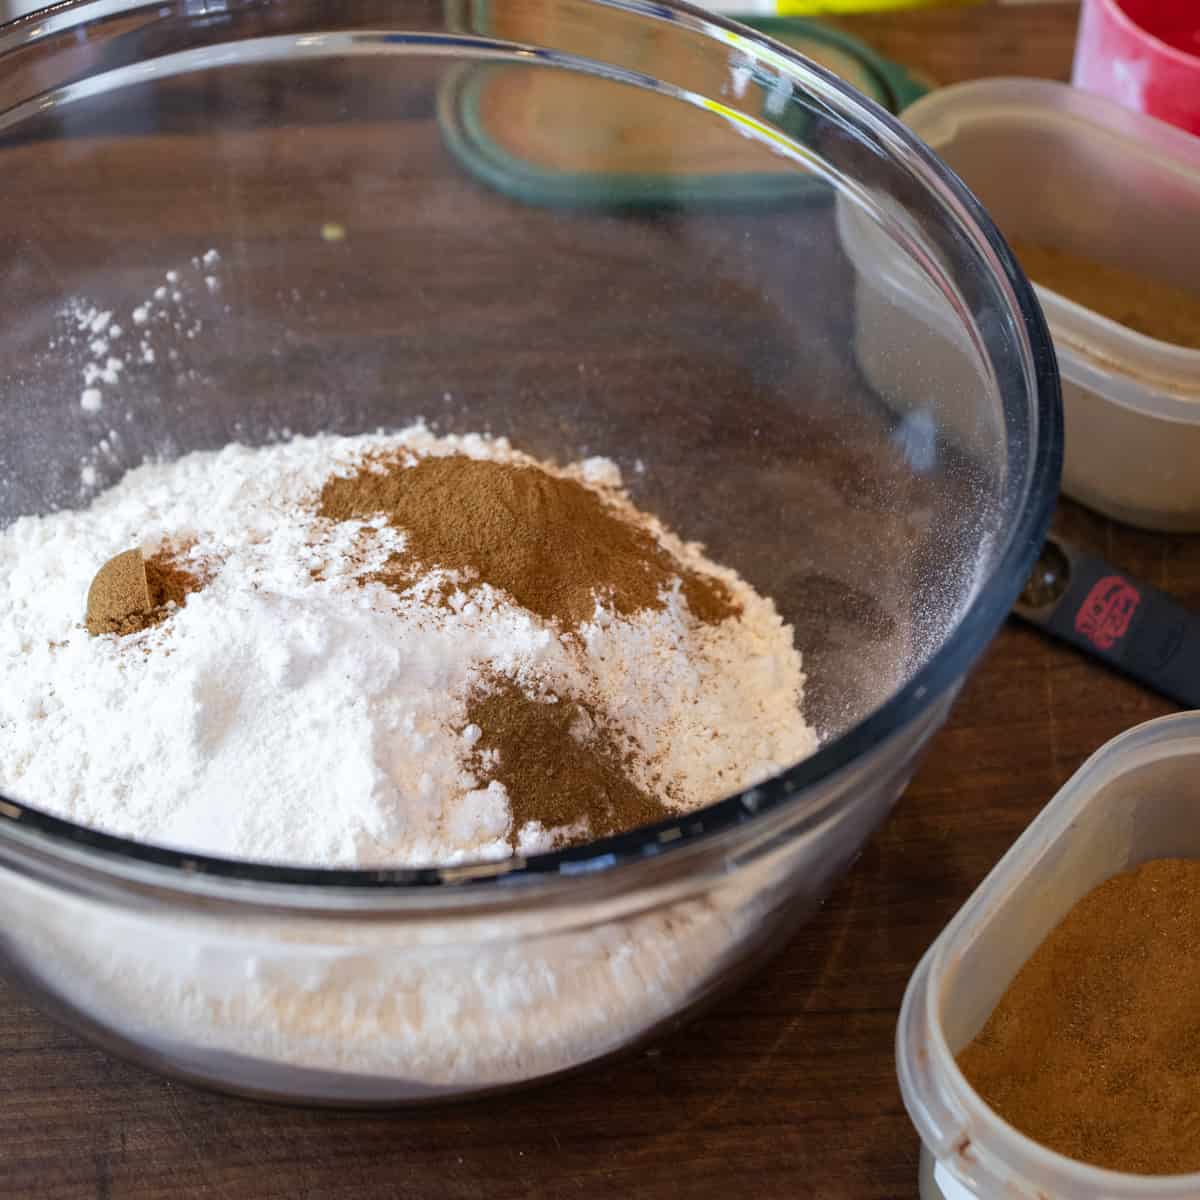 Flour, cinnamon and other dry ingredients dumped into a glass mixing bowl.